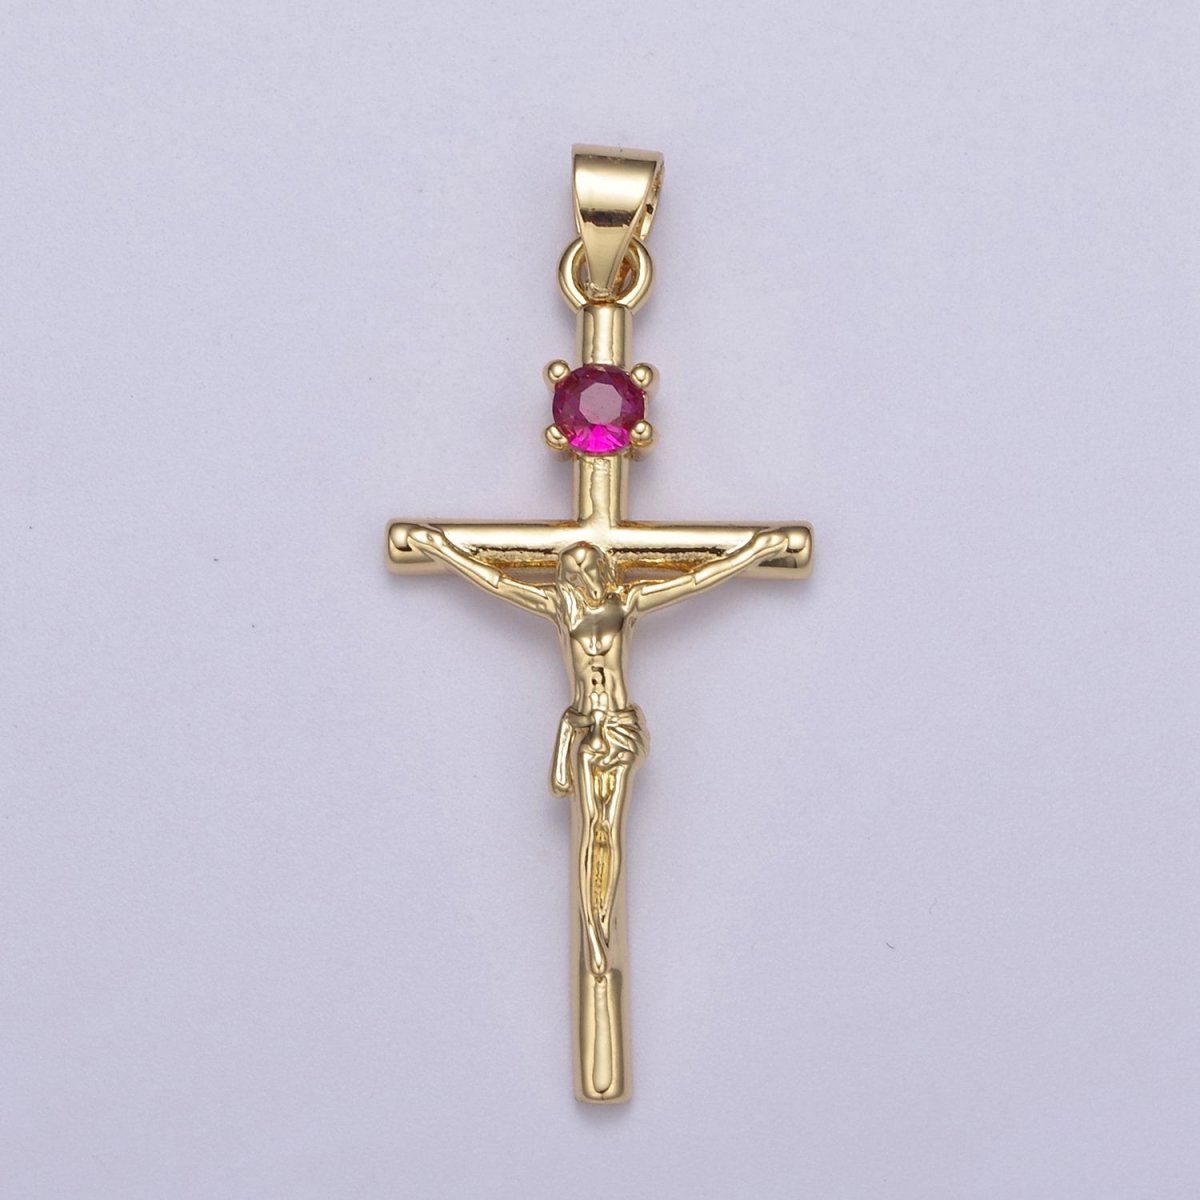 Gold Filled Crucifix Cross - Cross with Pink Crystal center - Simple 24K Gold Fill Cross For Necklace Bracelet Jewelry Making H-602 - DLUXCA